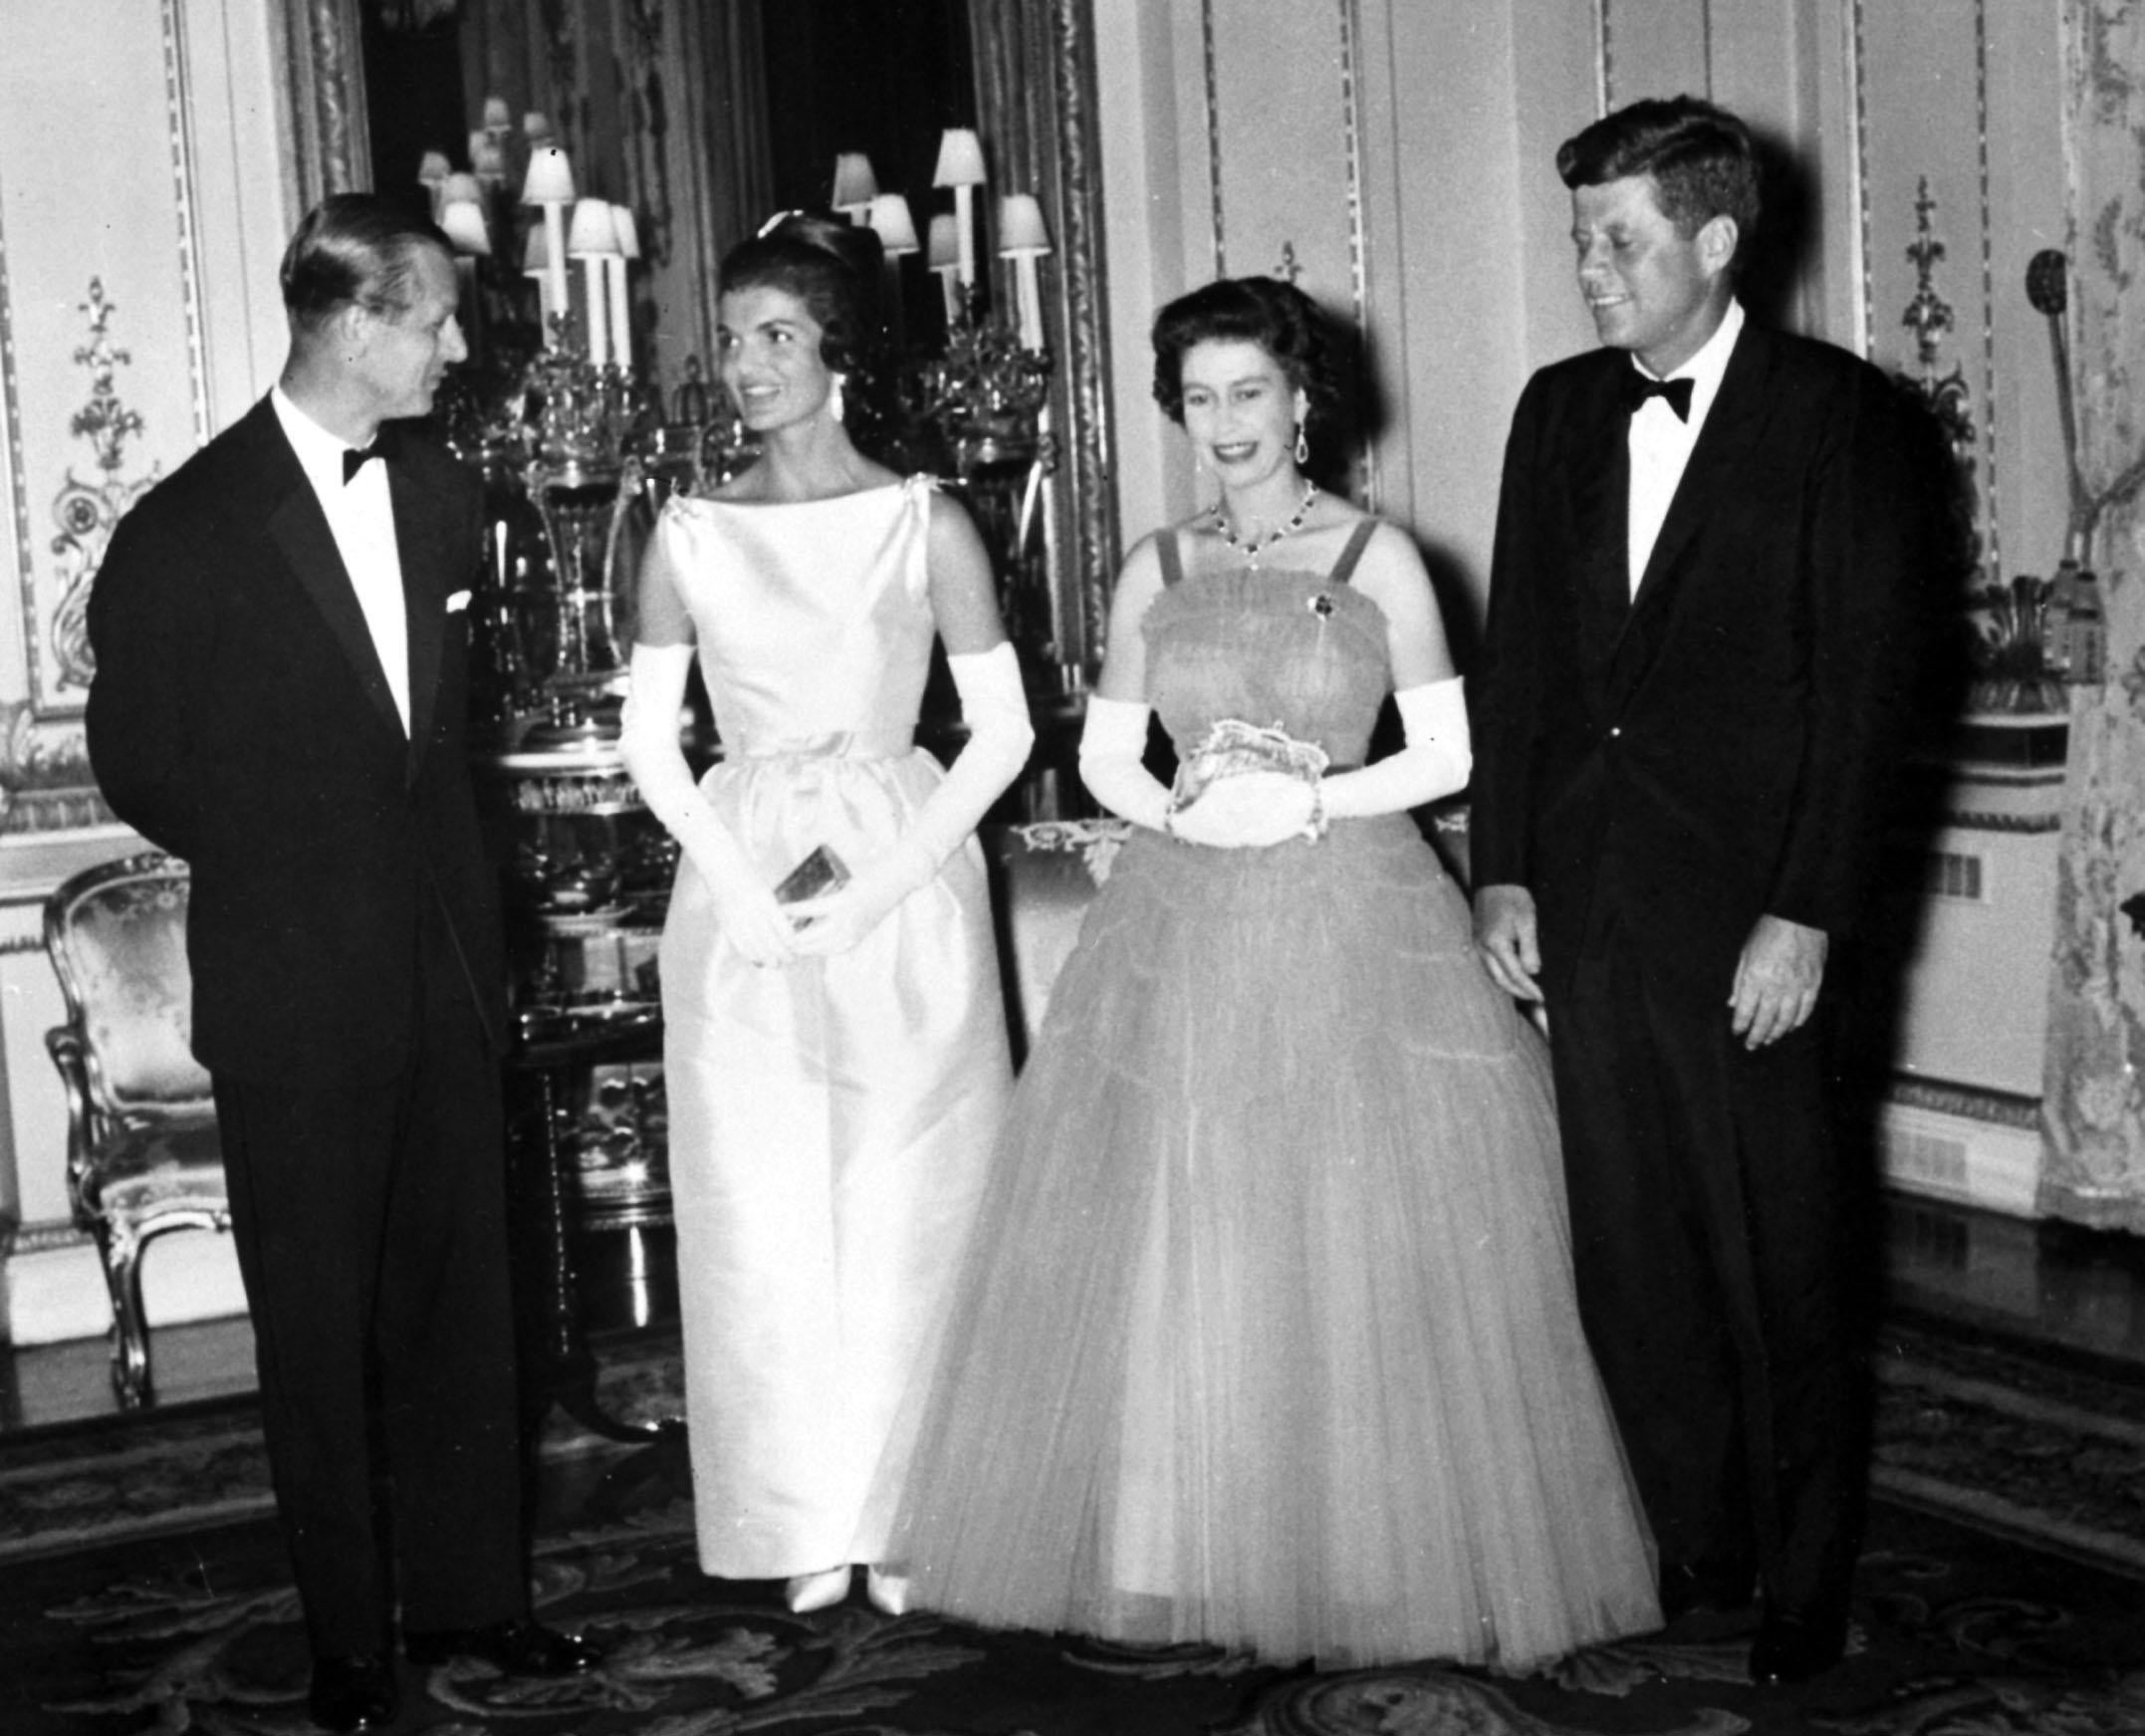 President John F Kennedy with his wife Jacqueline, meeting the Queen and the Duke of Edinburgh at Buckingham Palace in June 1961